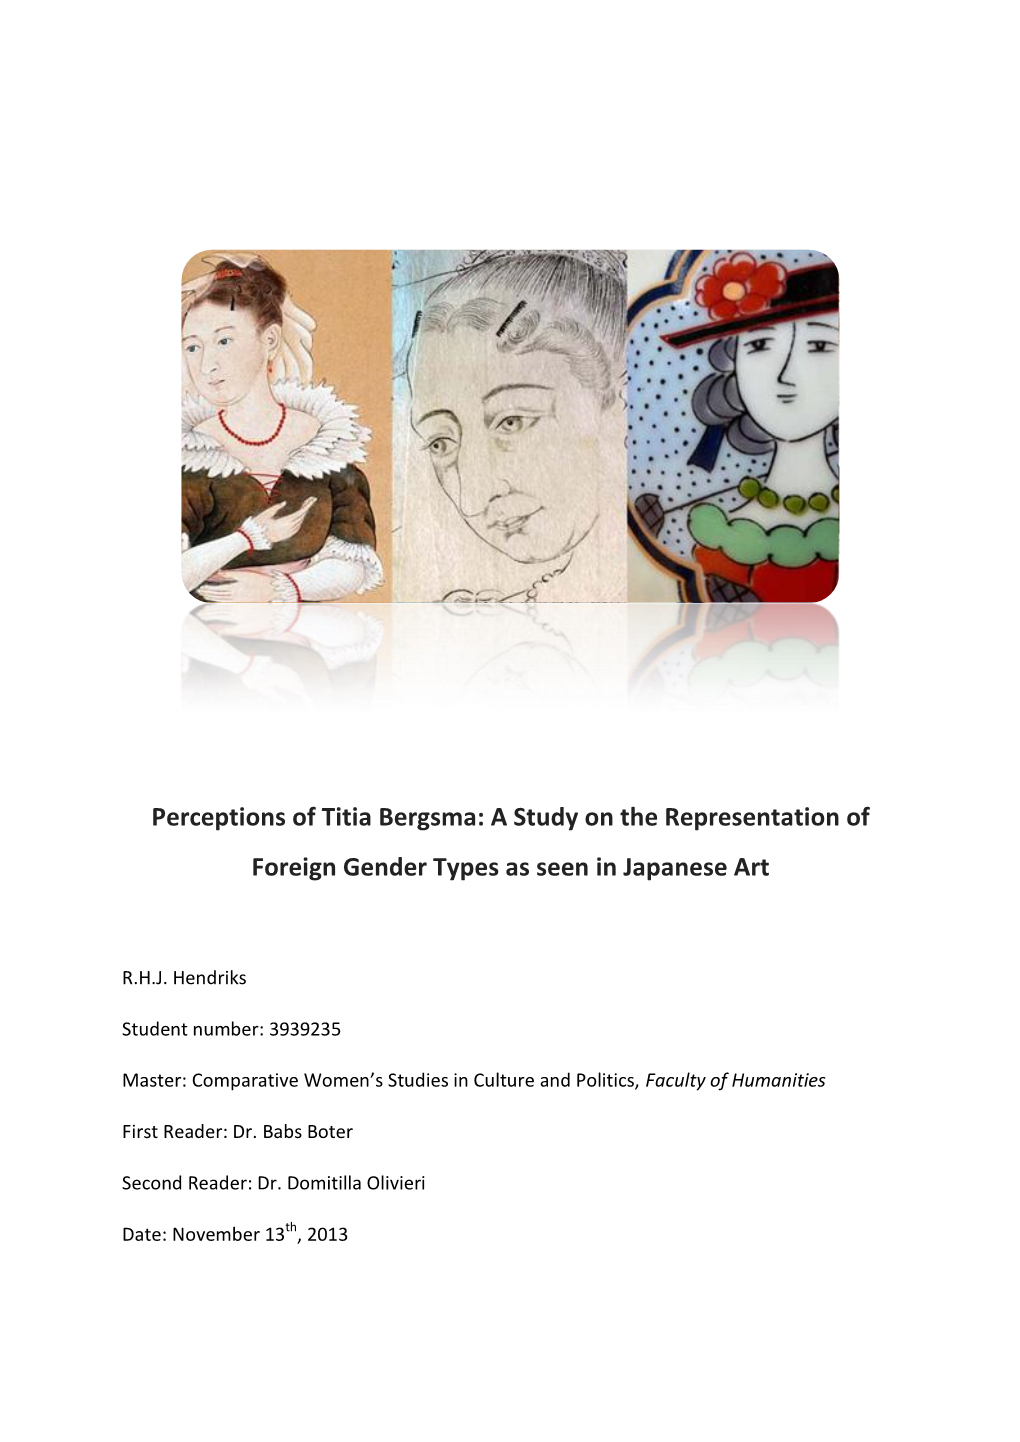 Perceptions of Titia Bergsma: a Study on the Representation of Foreign Gender Types As Seen in Japanese Art